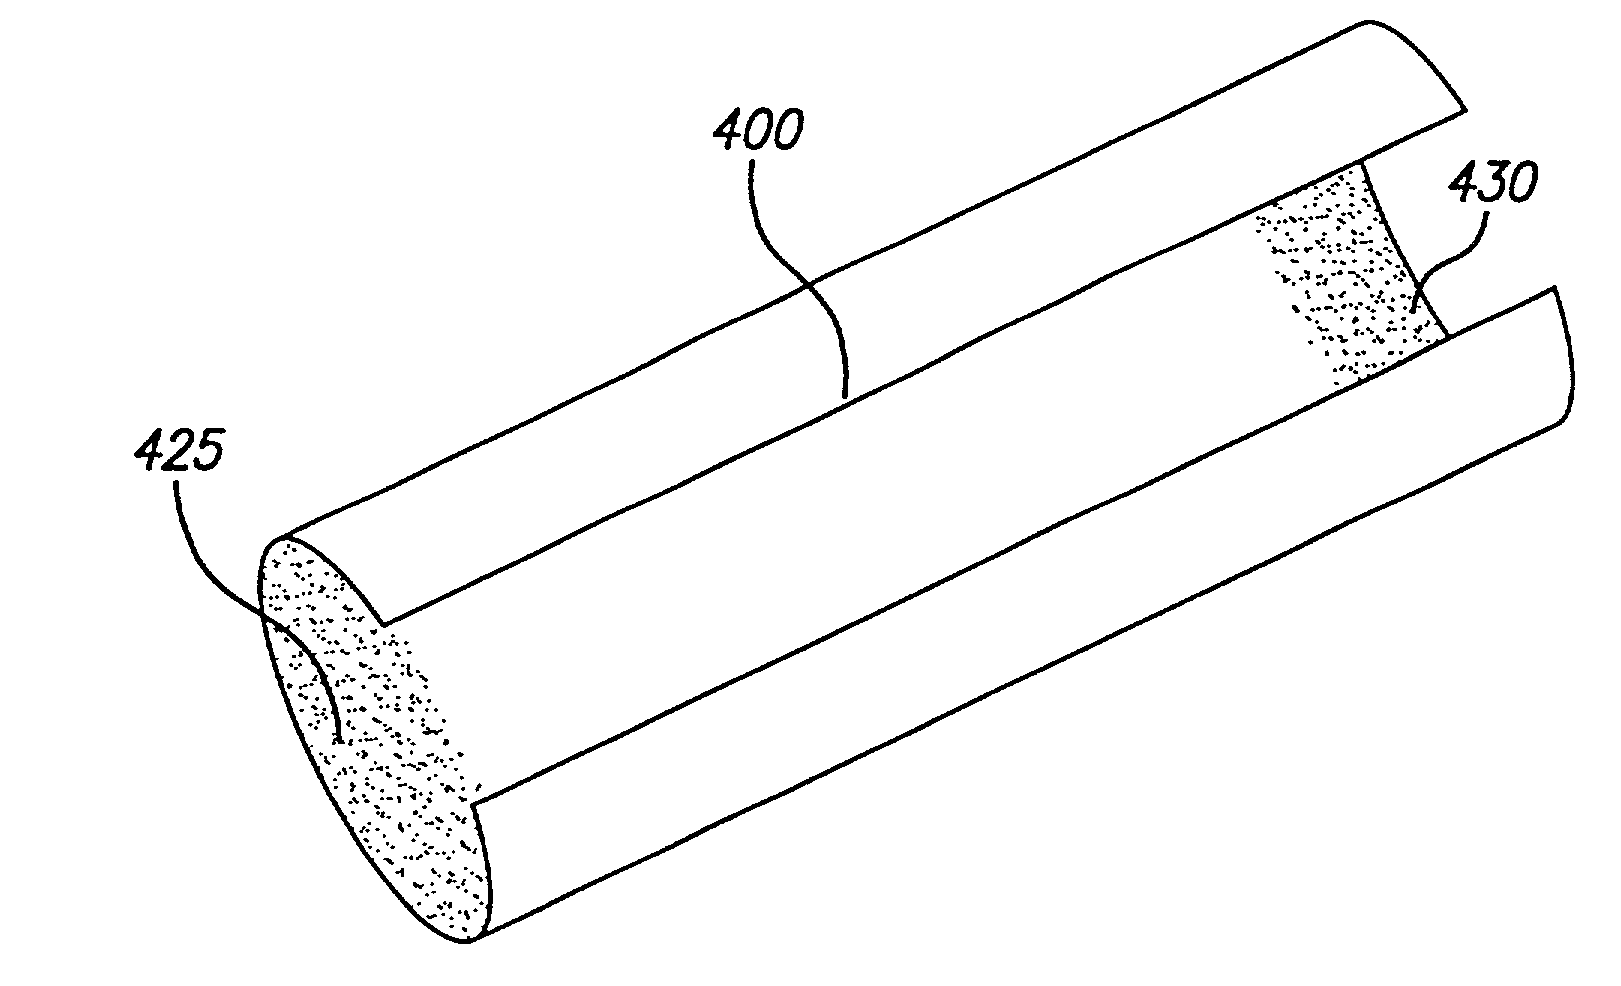 System and method for improved stent retention